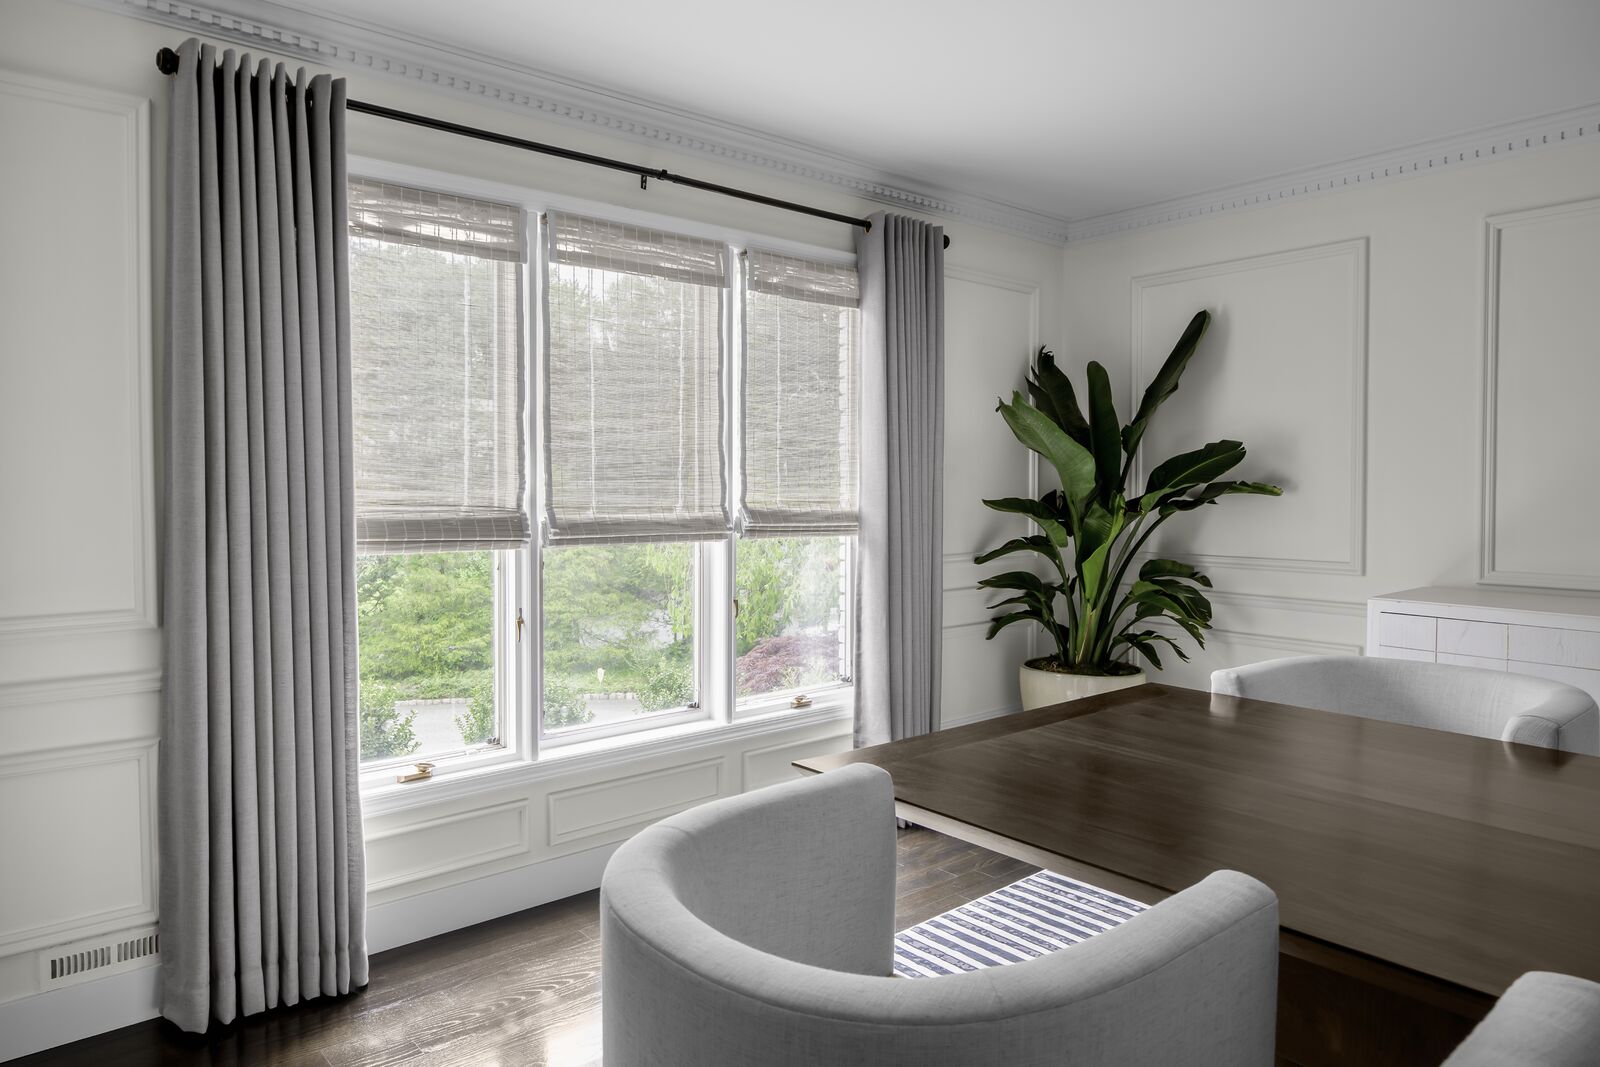 How To Measure Drapes For Windows